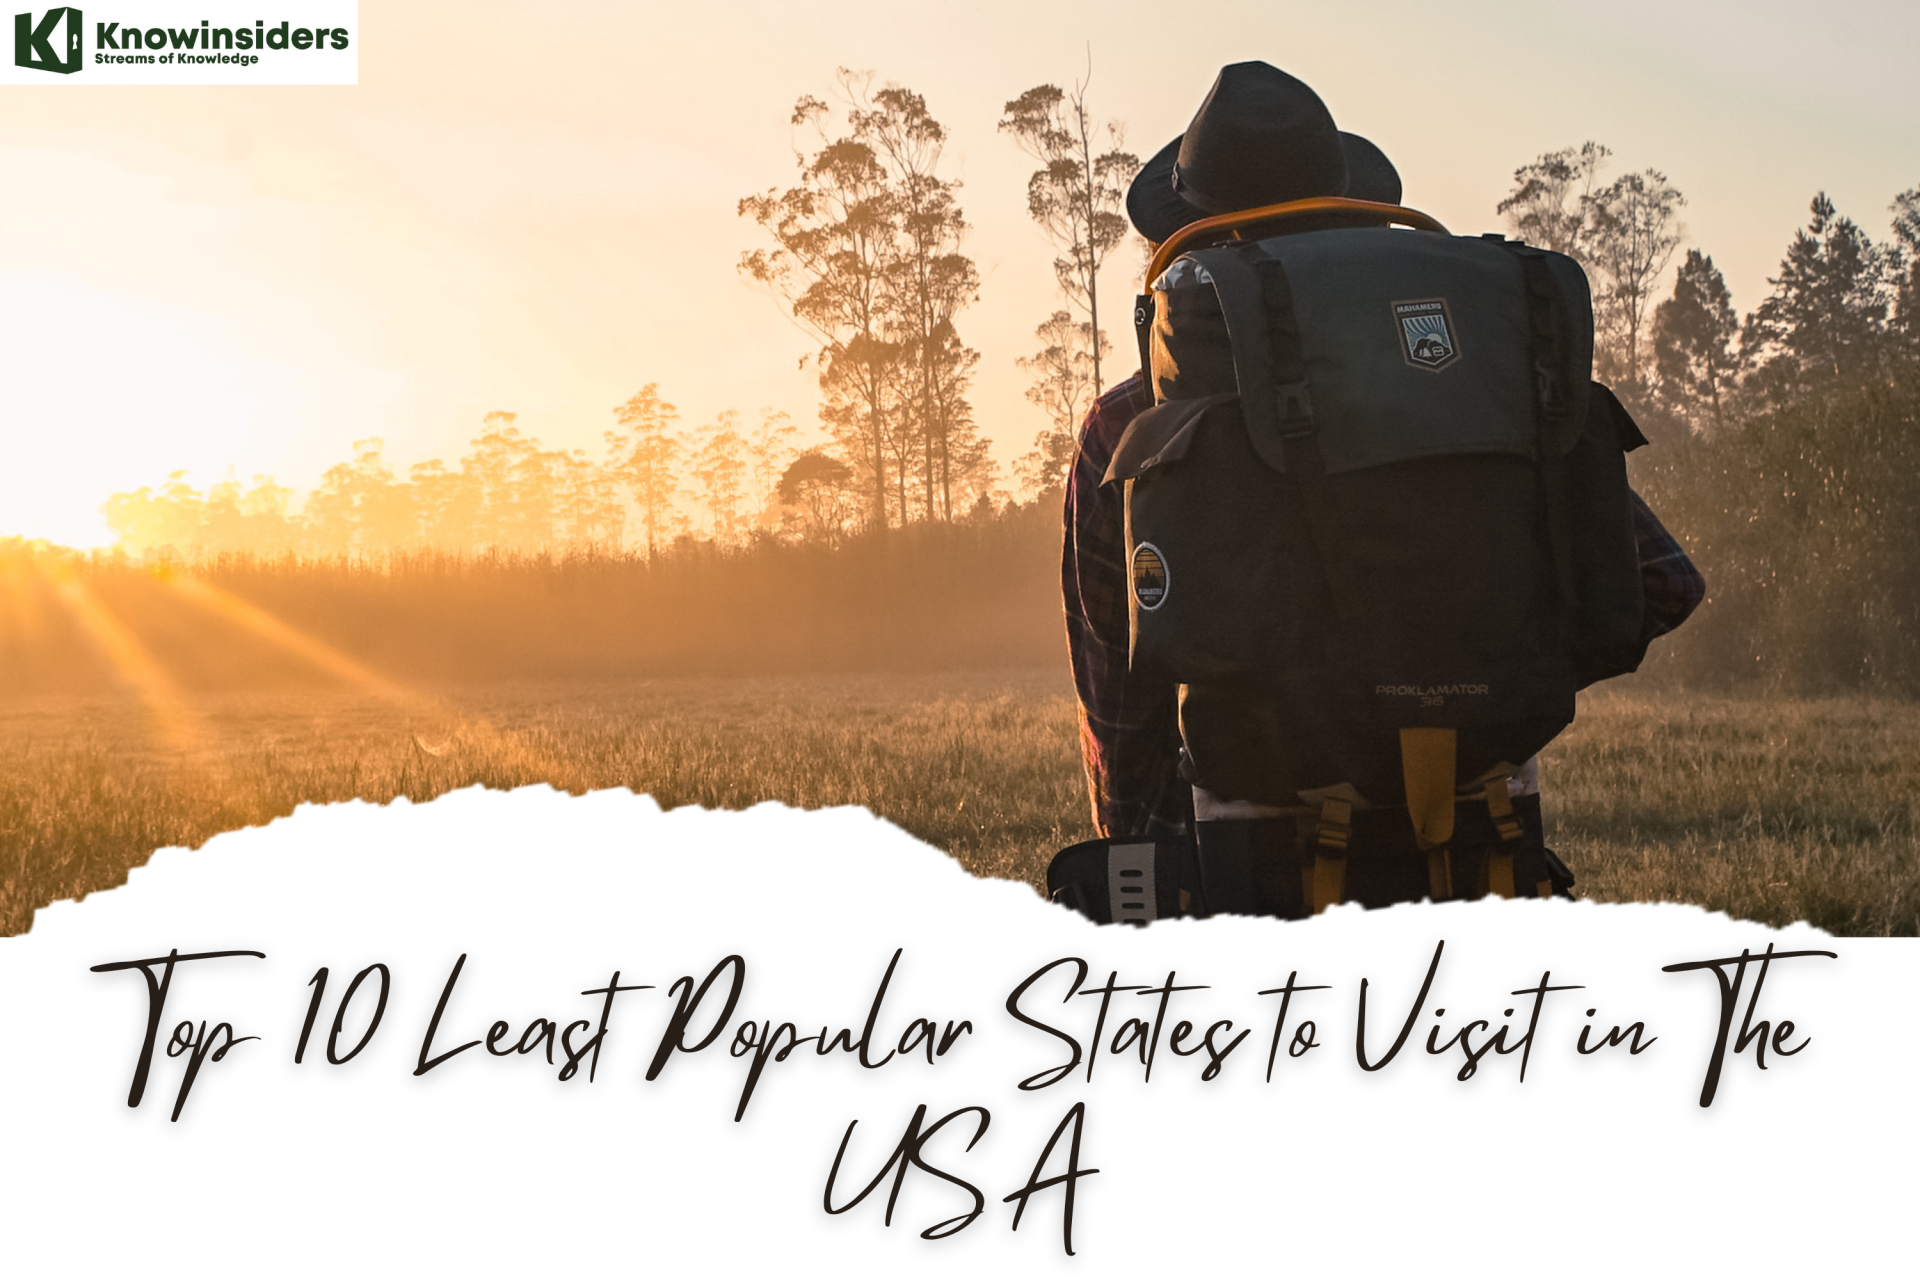 Top 10 Least Popular States to Visit in The USA